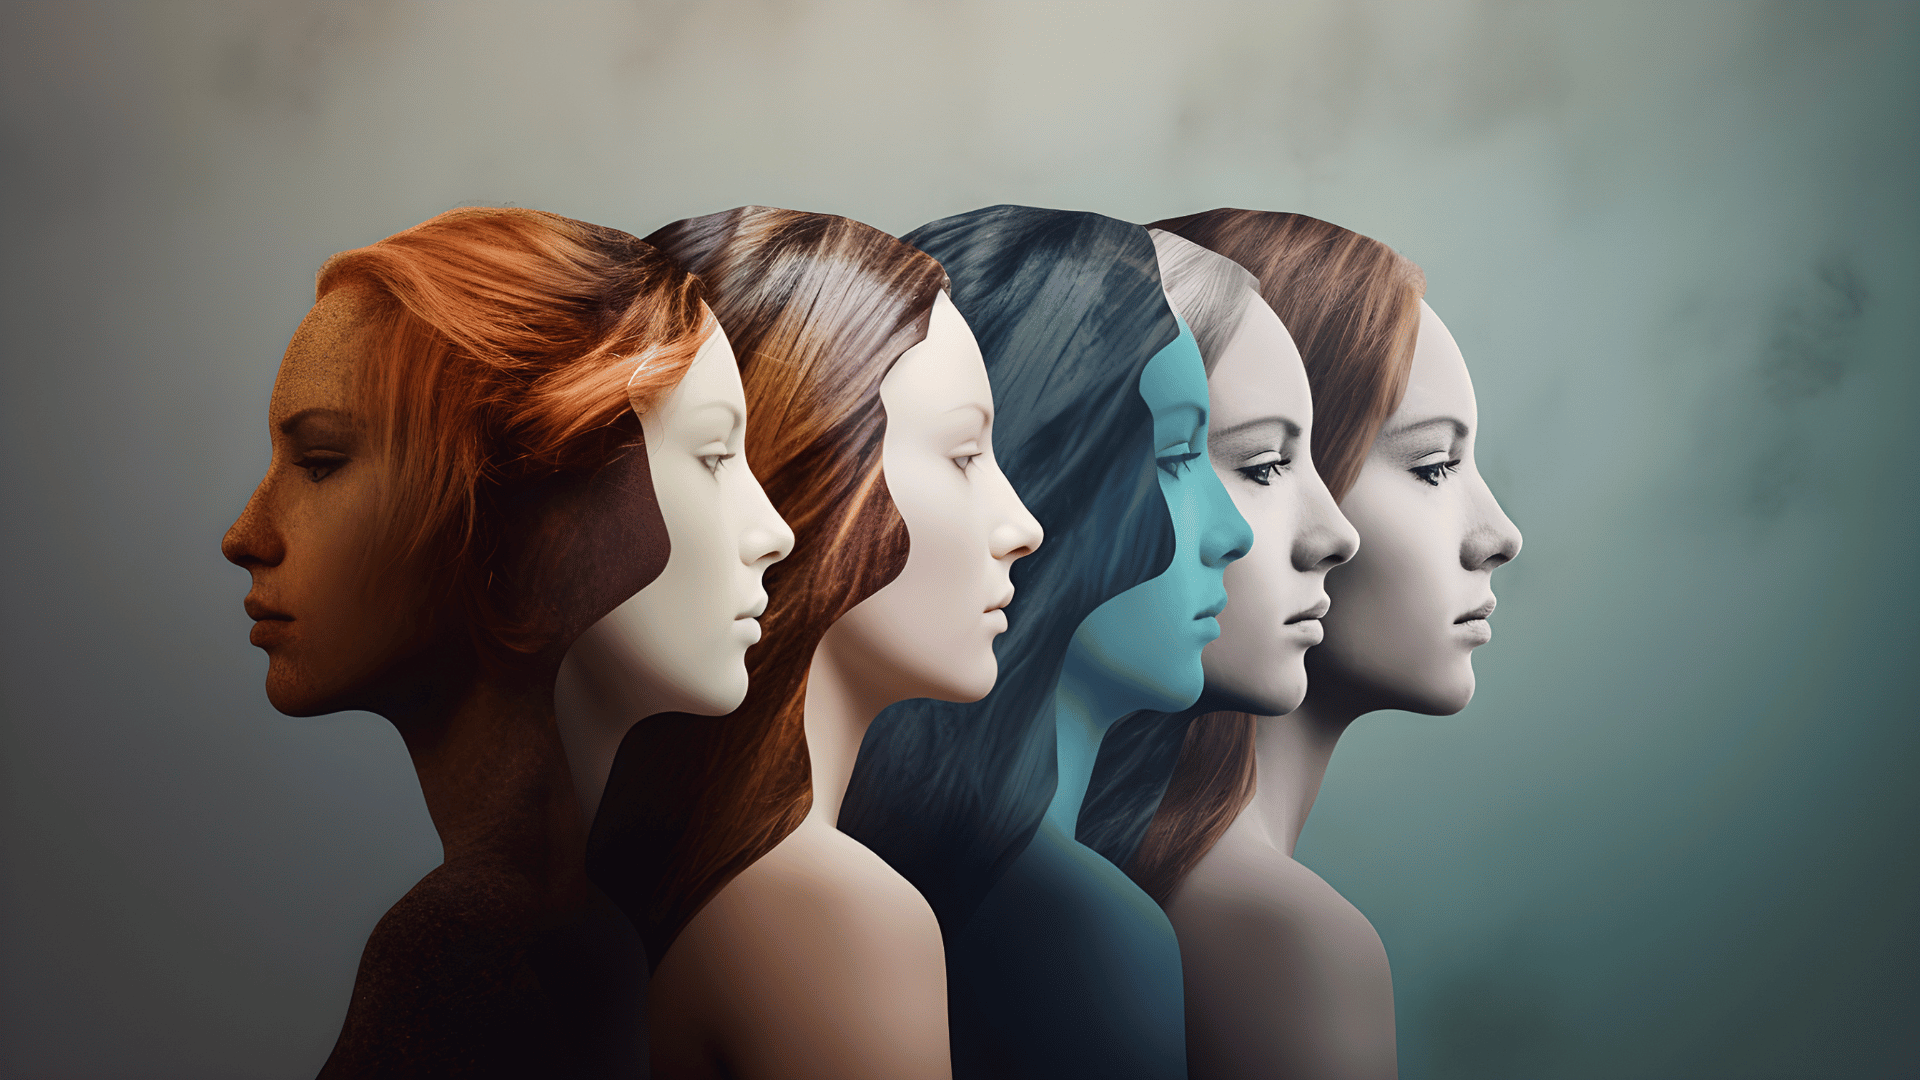 Duplications of a woman's face looking left and right in different colors